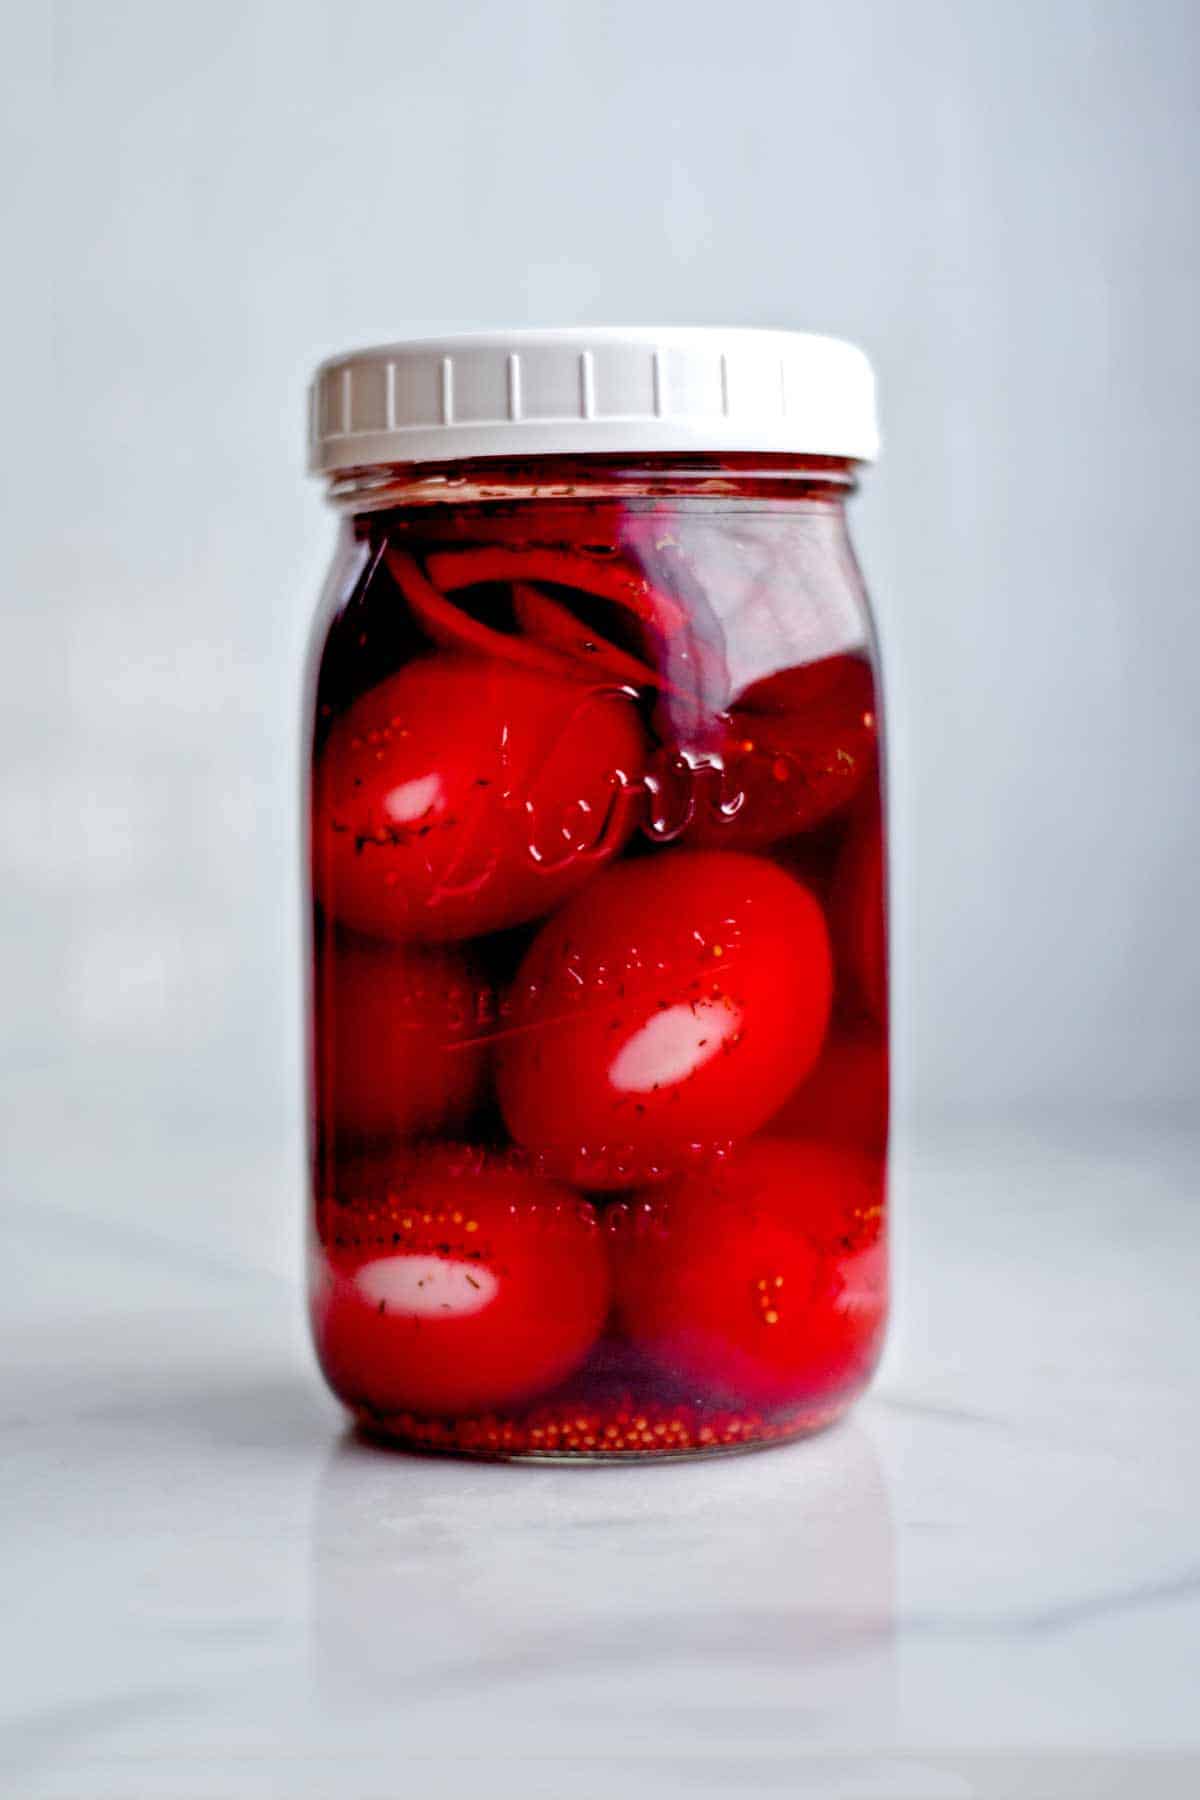 Refrigerator Pickled Eggs with Beets